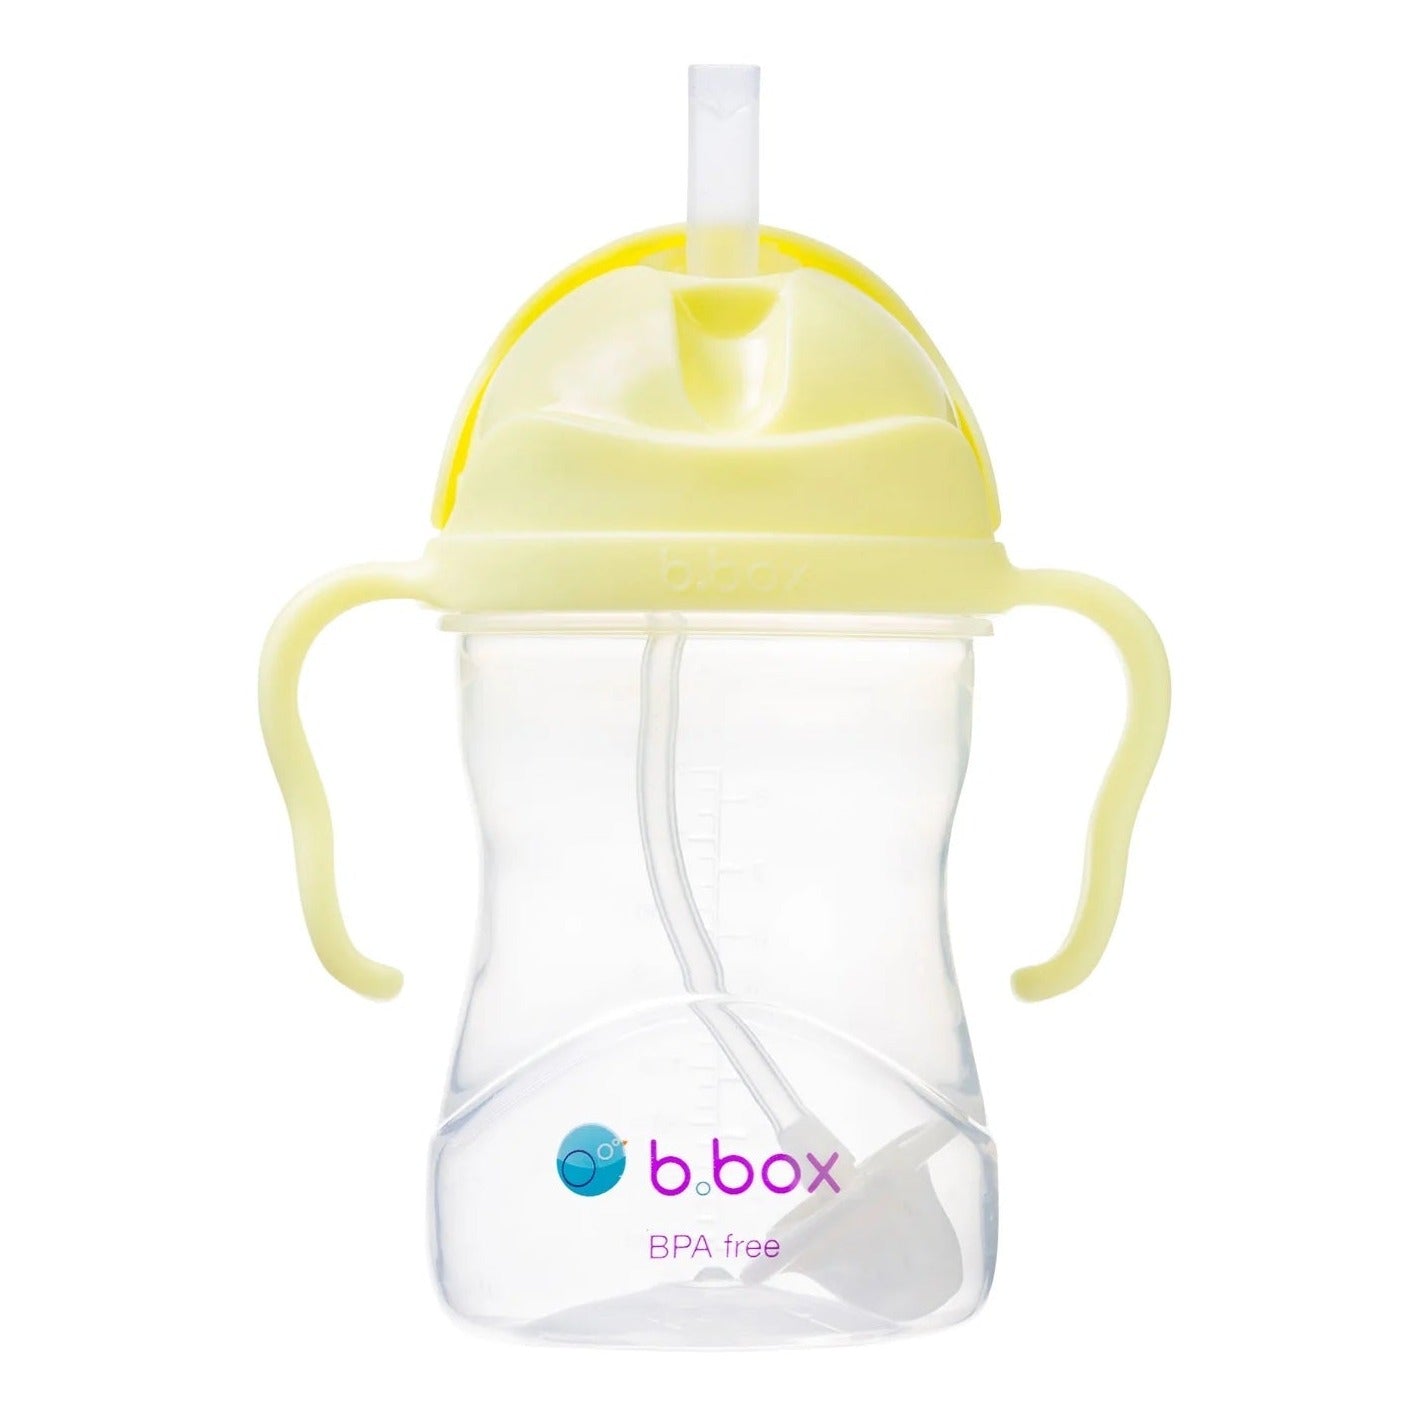 bbox sippy cup - angus and dudley